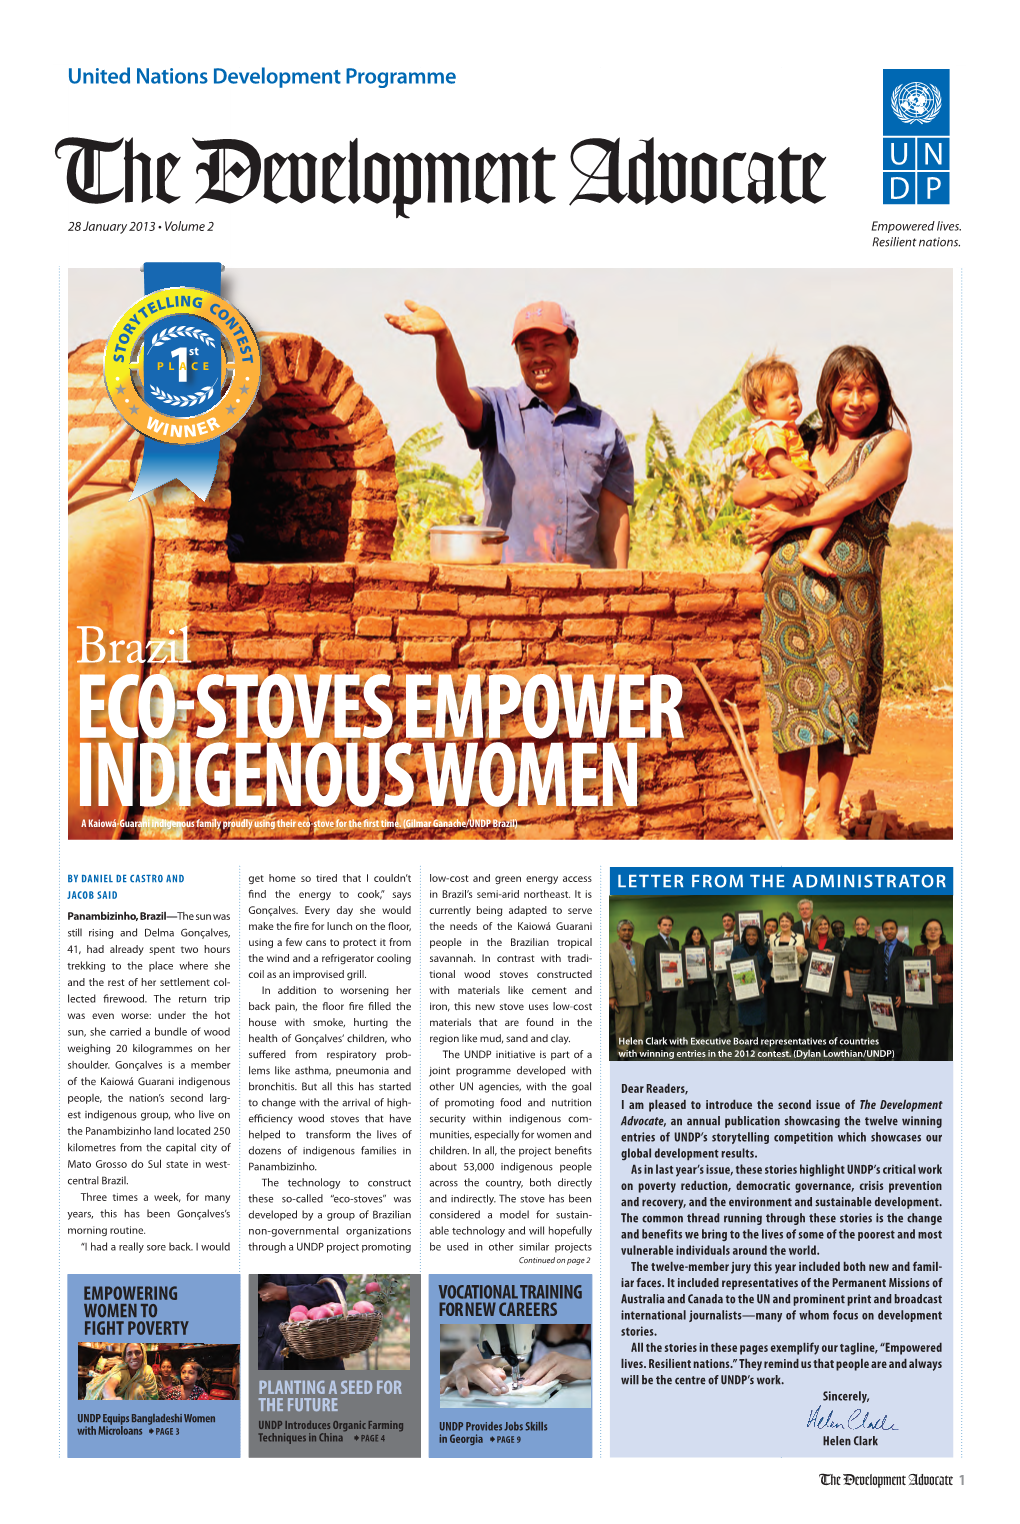 Brazilo-Stoves Empower Indigenous Women a Kaiowá-Guarani Indigenous Family Proudly Using Their Eco-Stove for the First Time